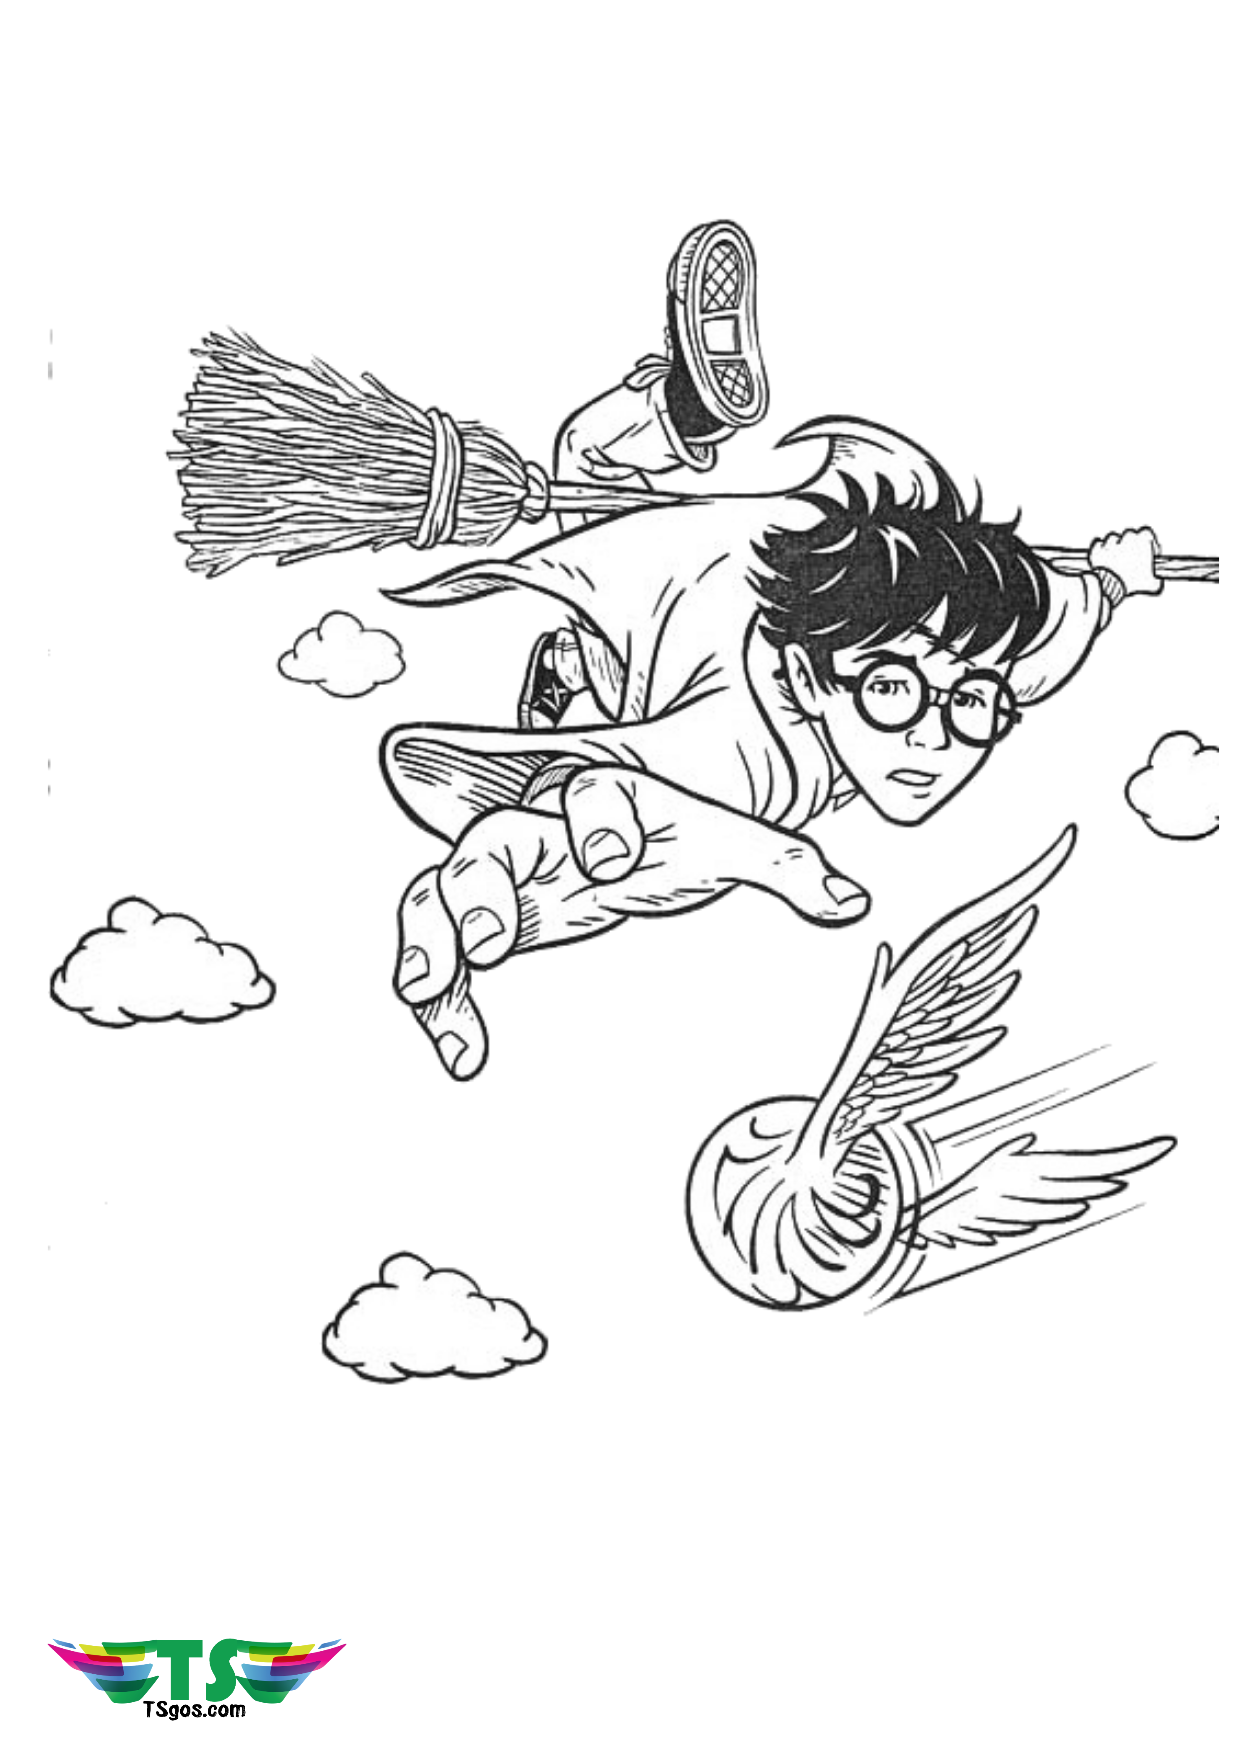 Harry Potter riding broom Nimbus and chasing Quidditch coloring